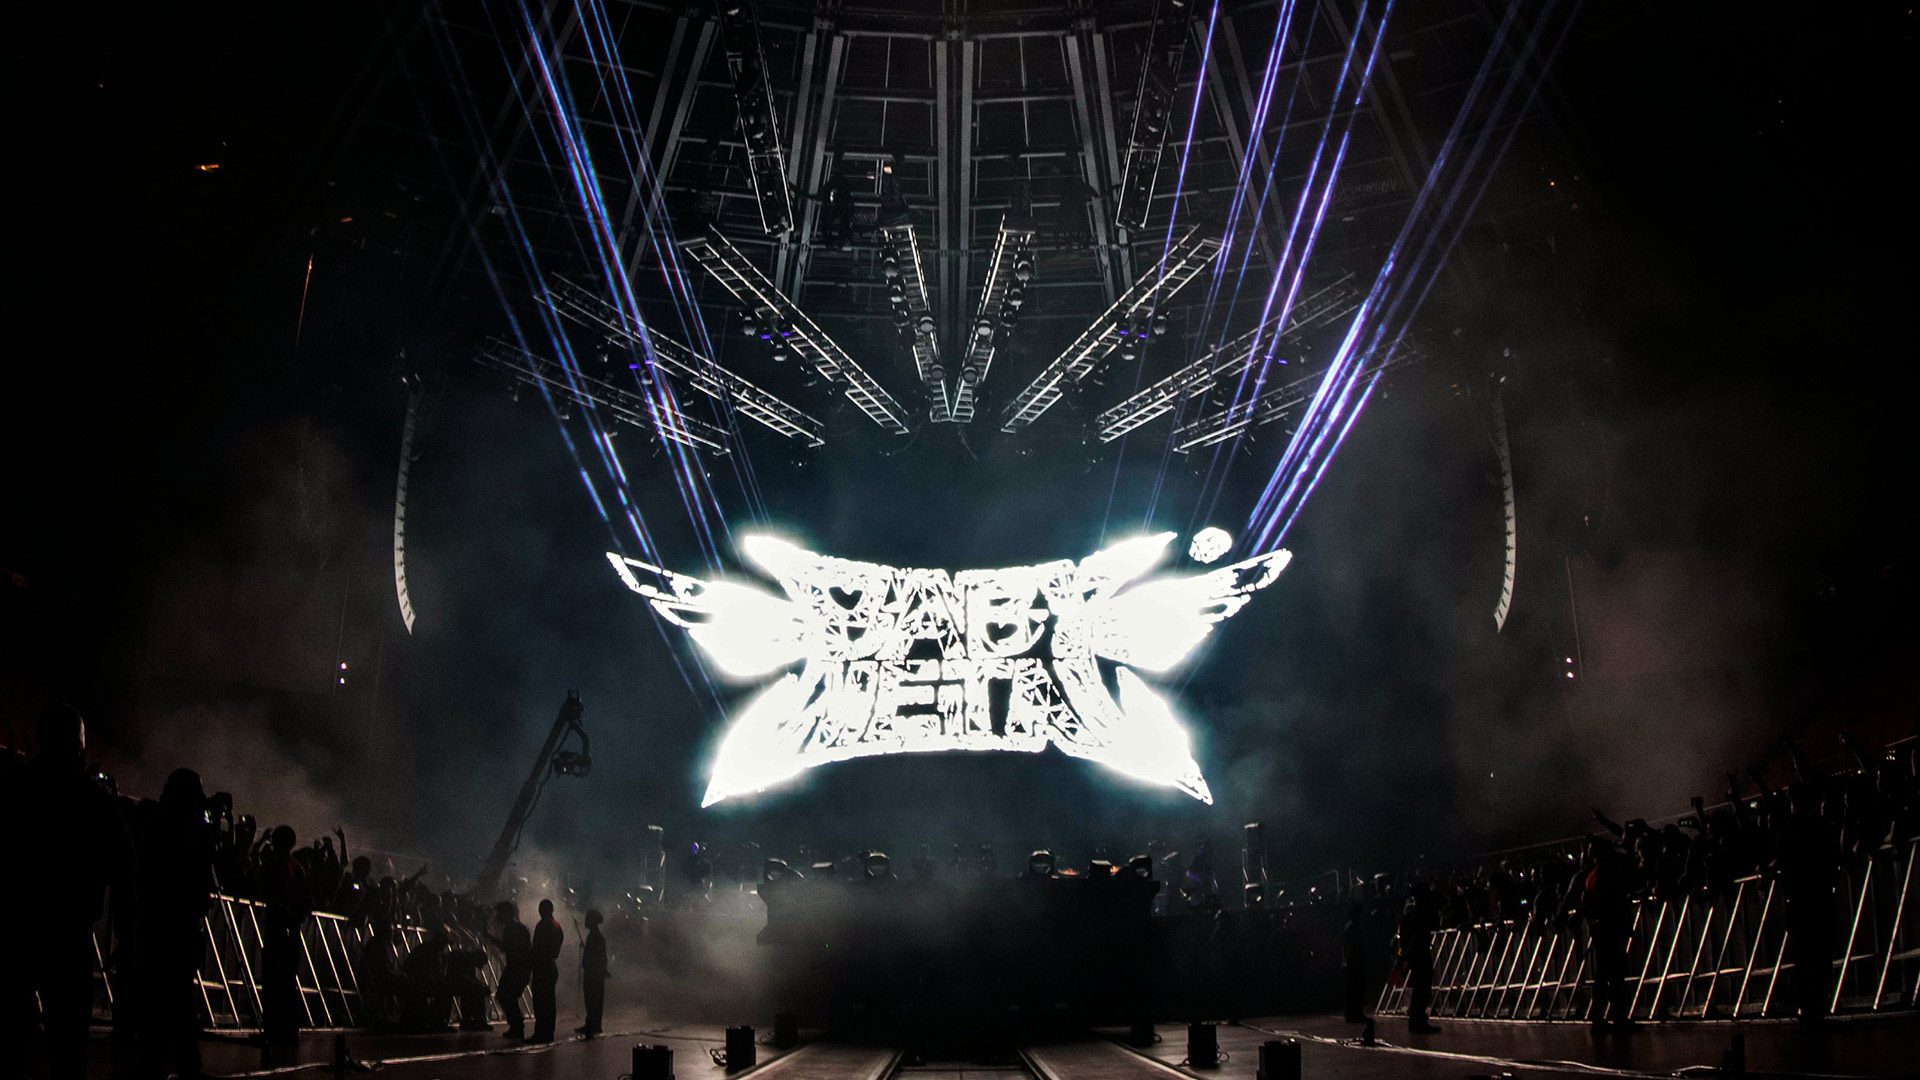 LIVE AT THE FORUM / METAL GALAXY WORLD TOUR IN JAPAN - BABYMETAL Live